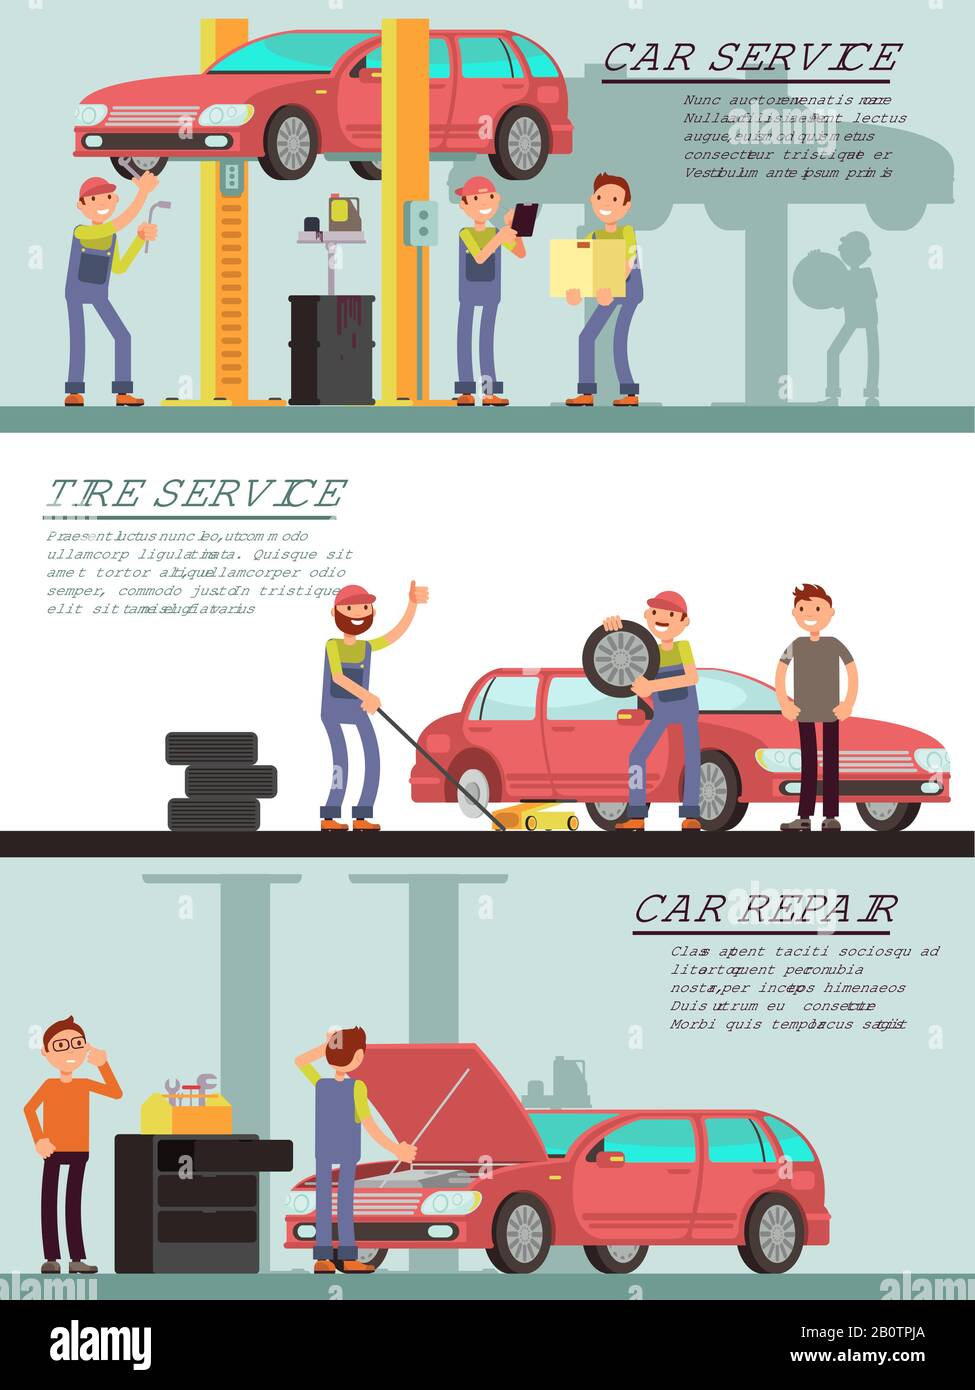 Car services and auto garag vector marketing banners with cartoon mechanic worker. Car service and tire service, repair transport maintenance illustration Stock Vector